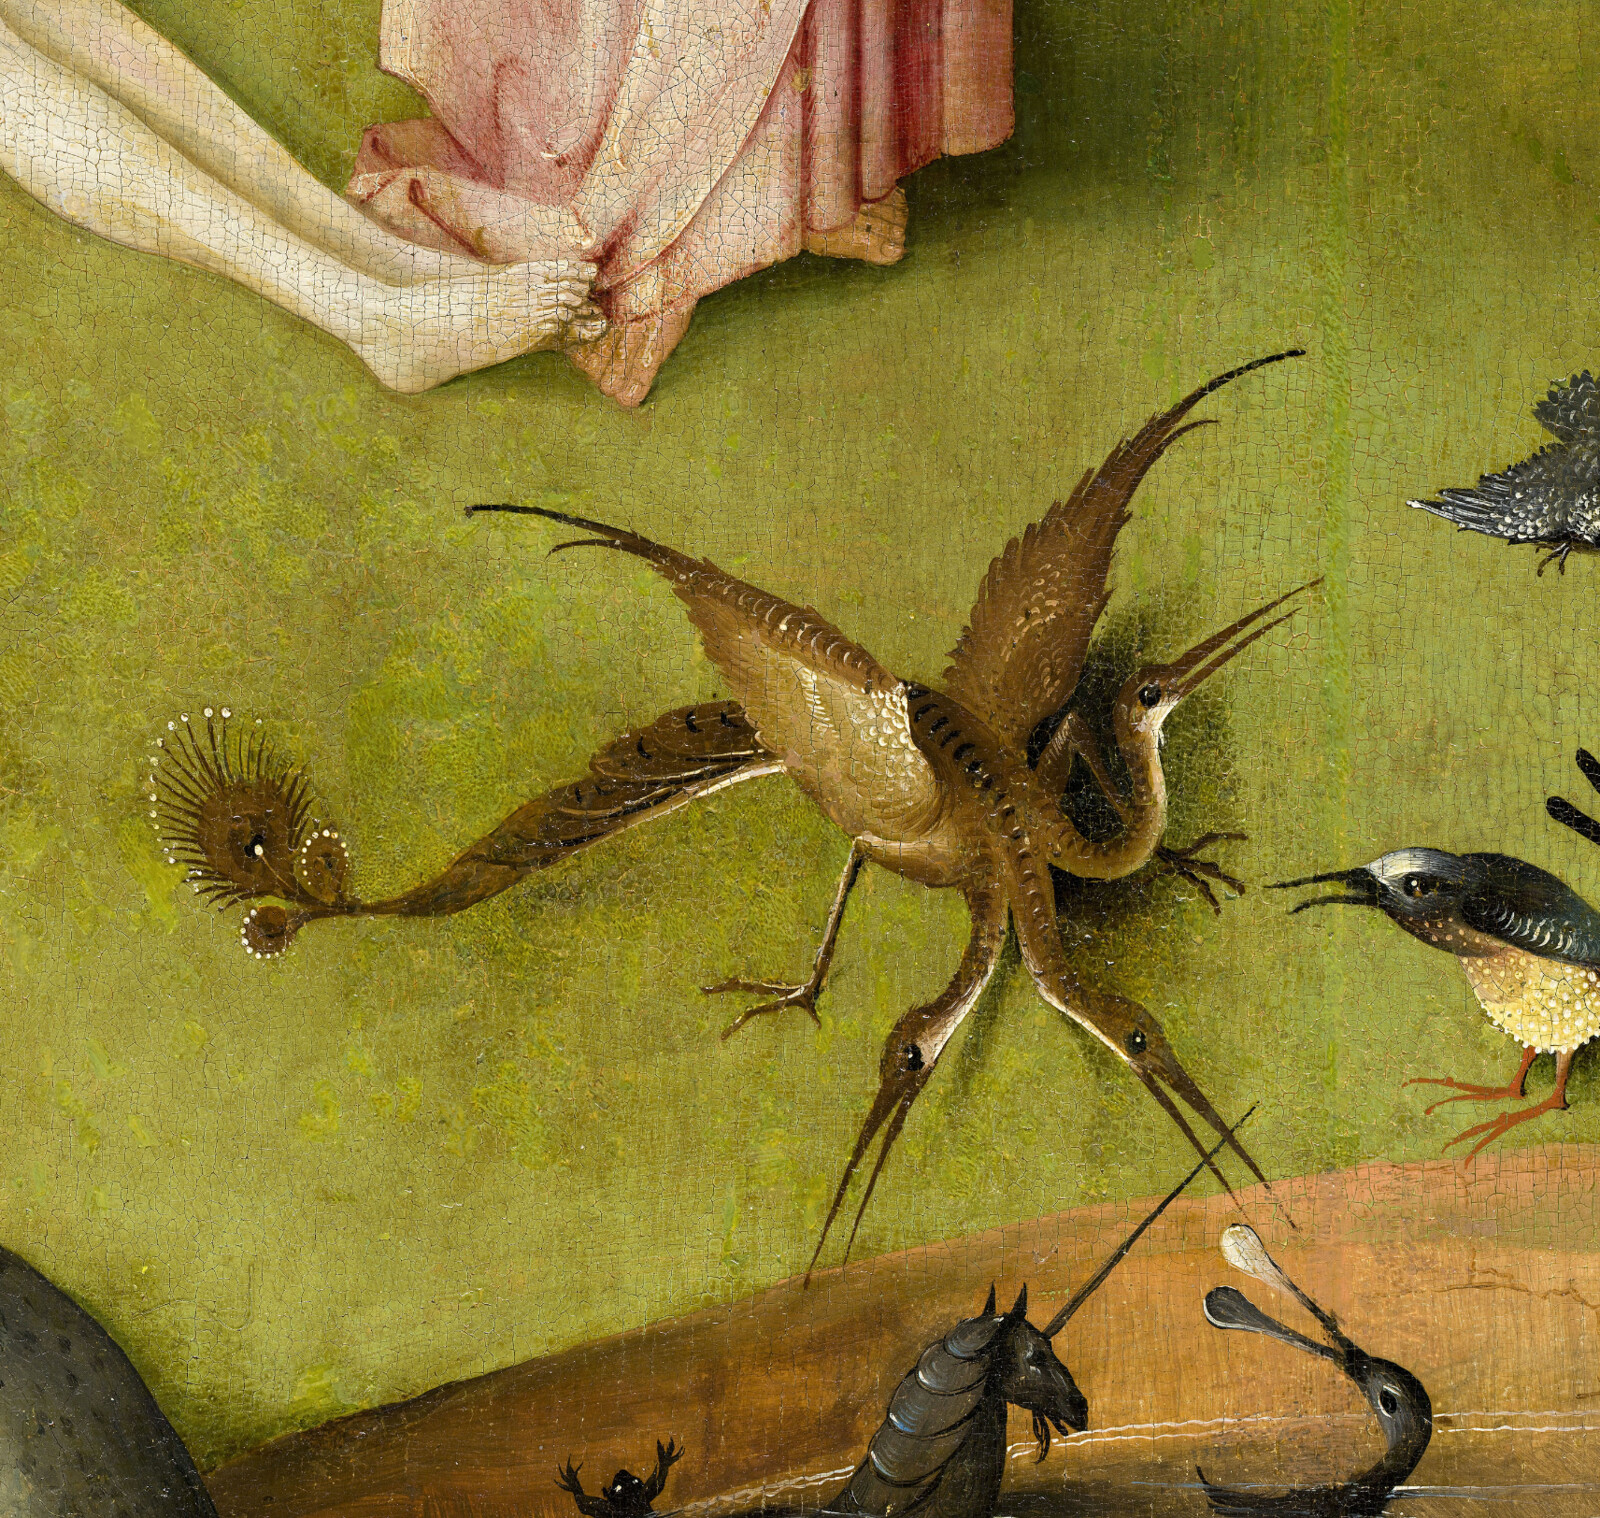 Reference image. From Hieronymous Bosch's "The Garden of Earthly Delights".